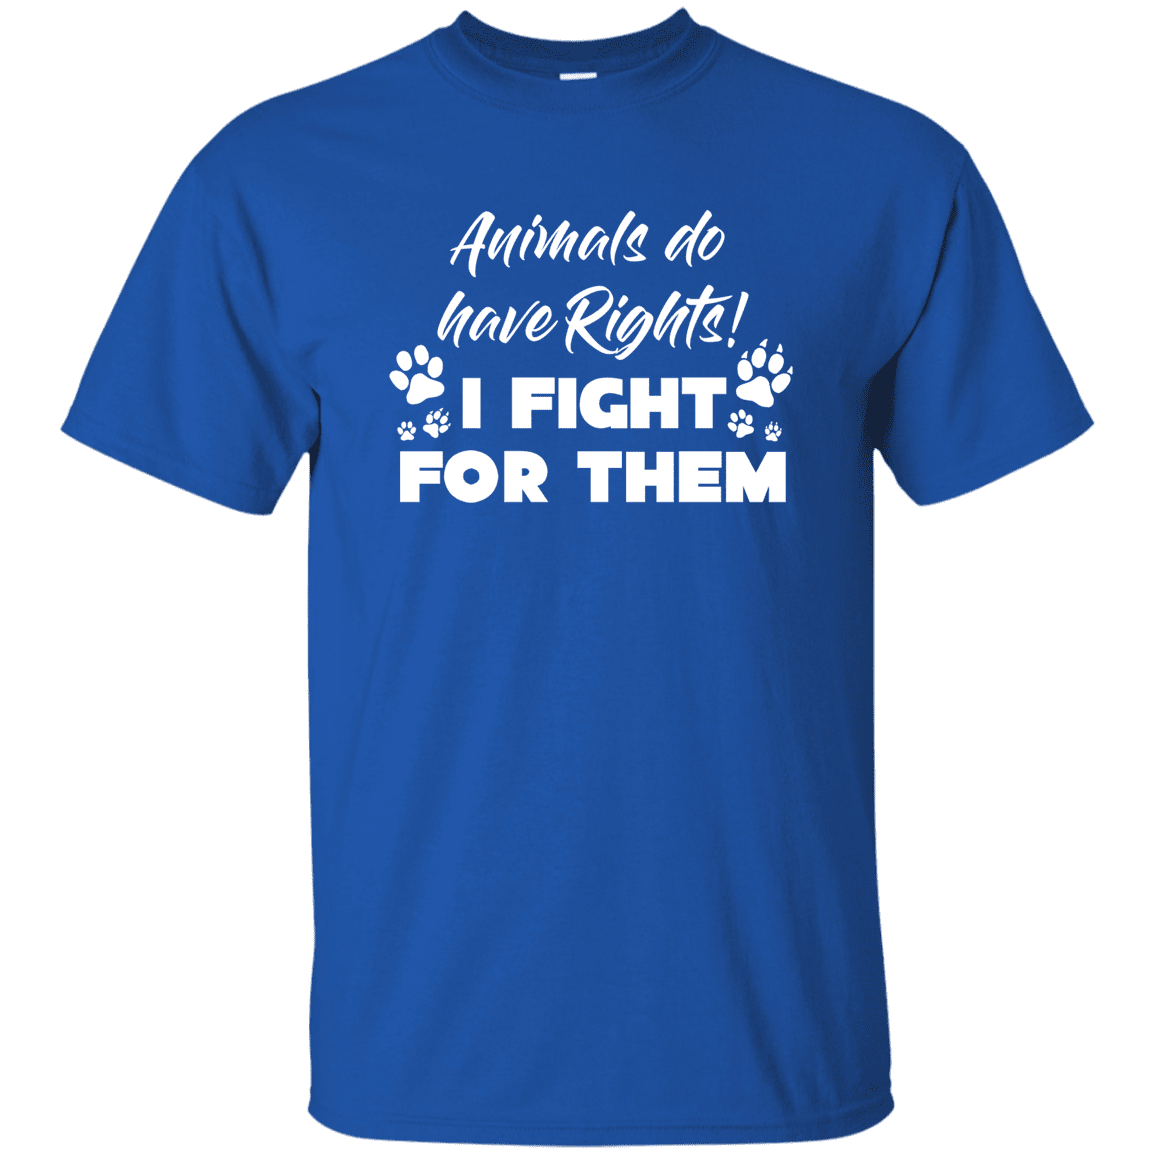 Animals Do have Rights - T Shirt.